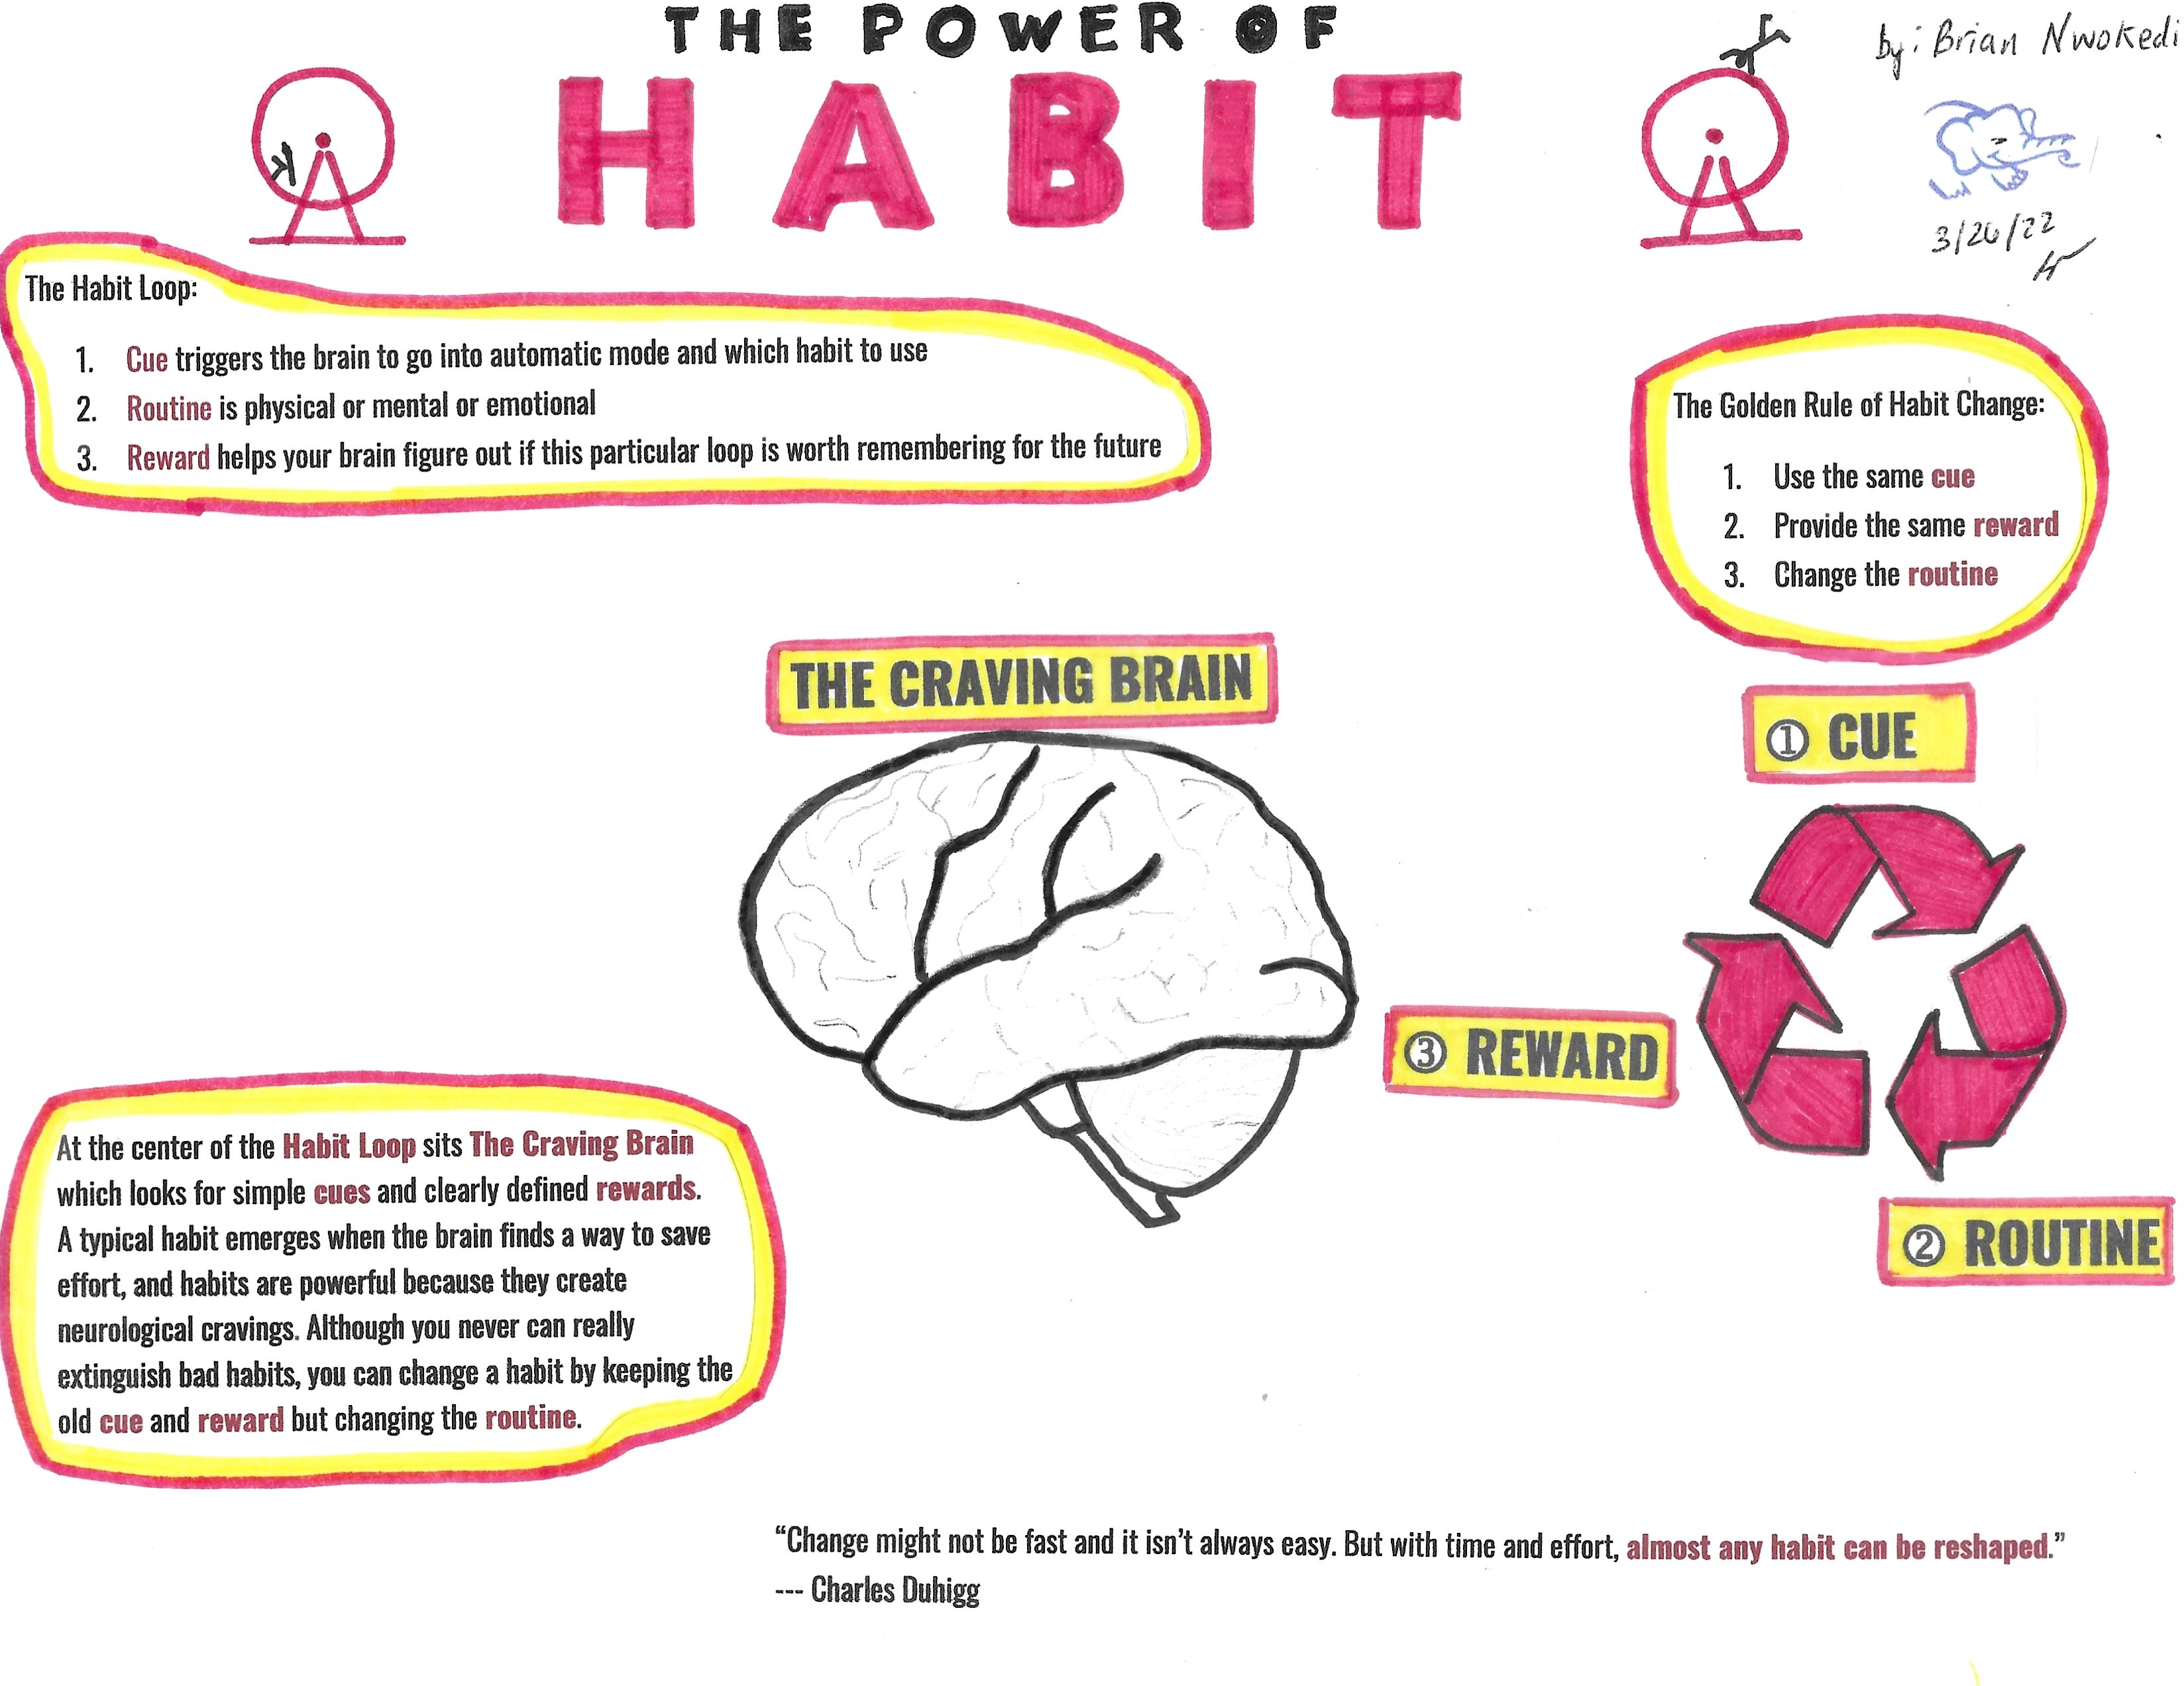 The Power of Habit by Brian Nwokedi